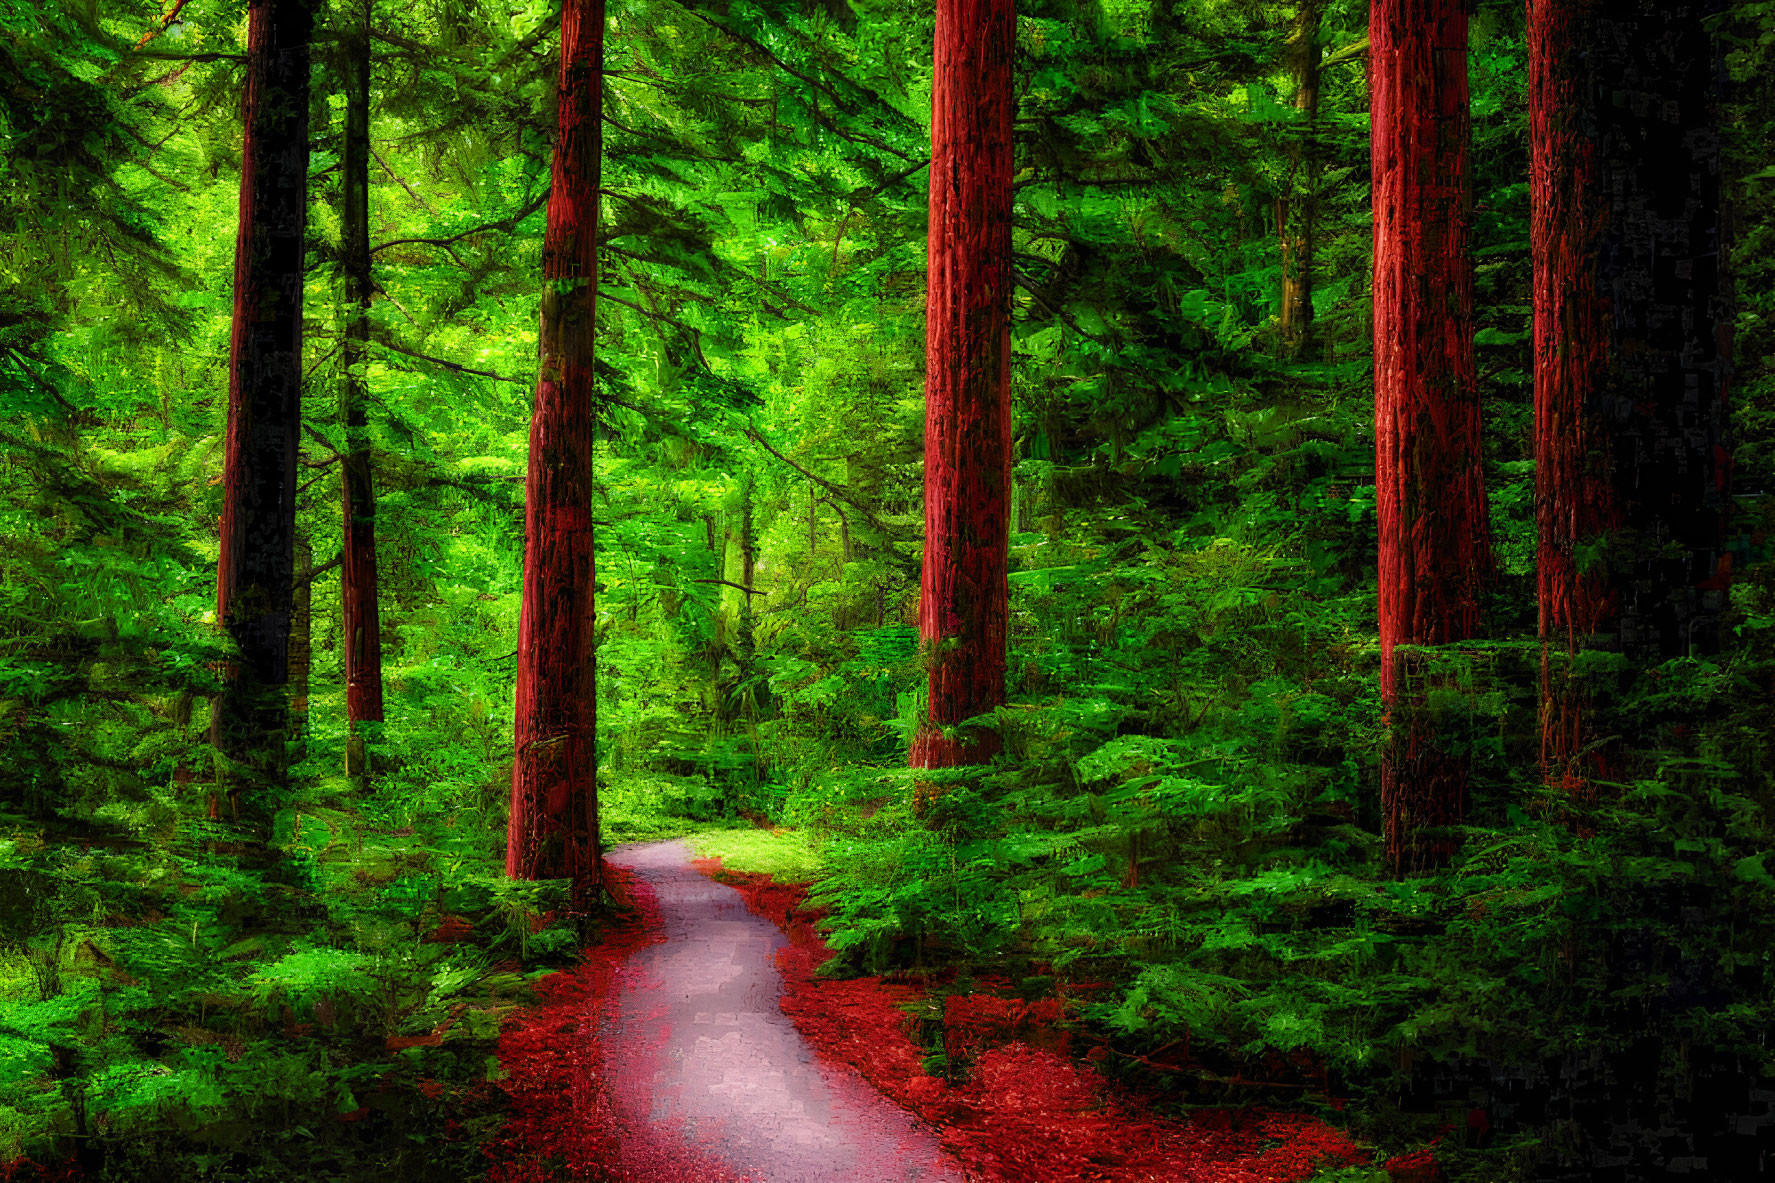 Scenic forest path with redwood trees and fallen leaves